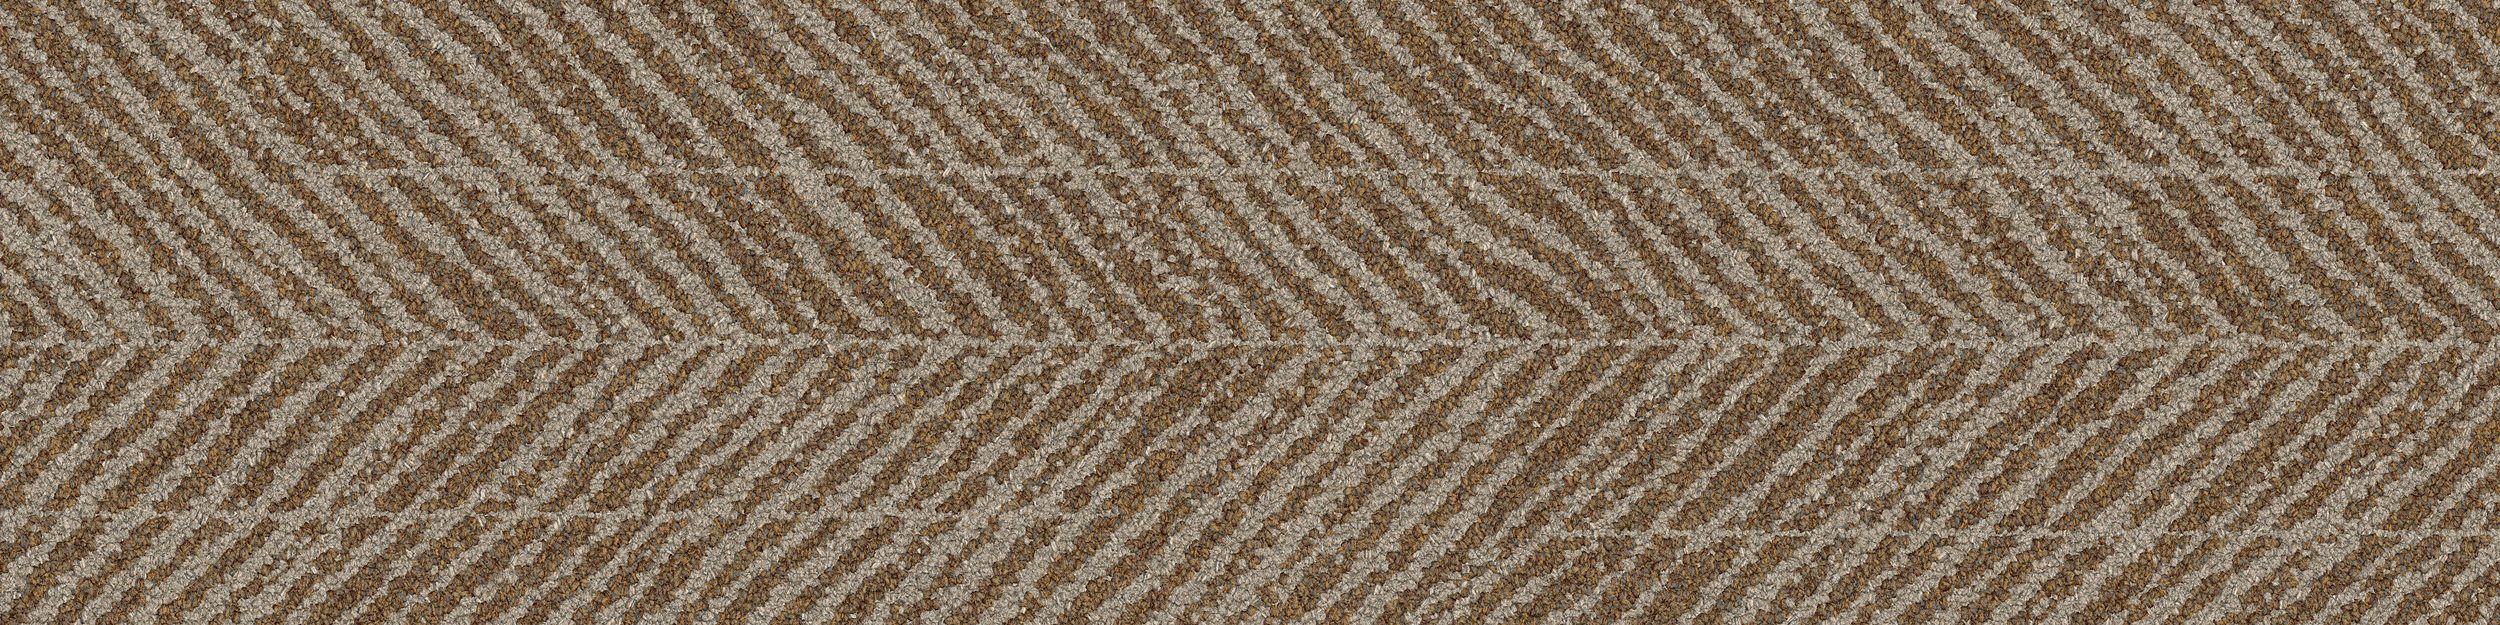 Third Space 310 Carpet Tile in Amber image number 2